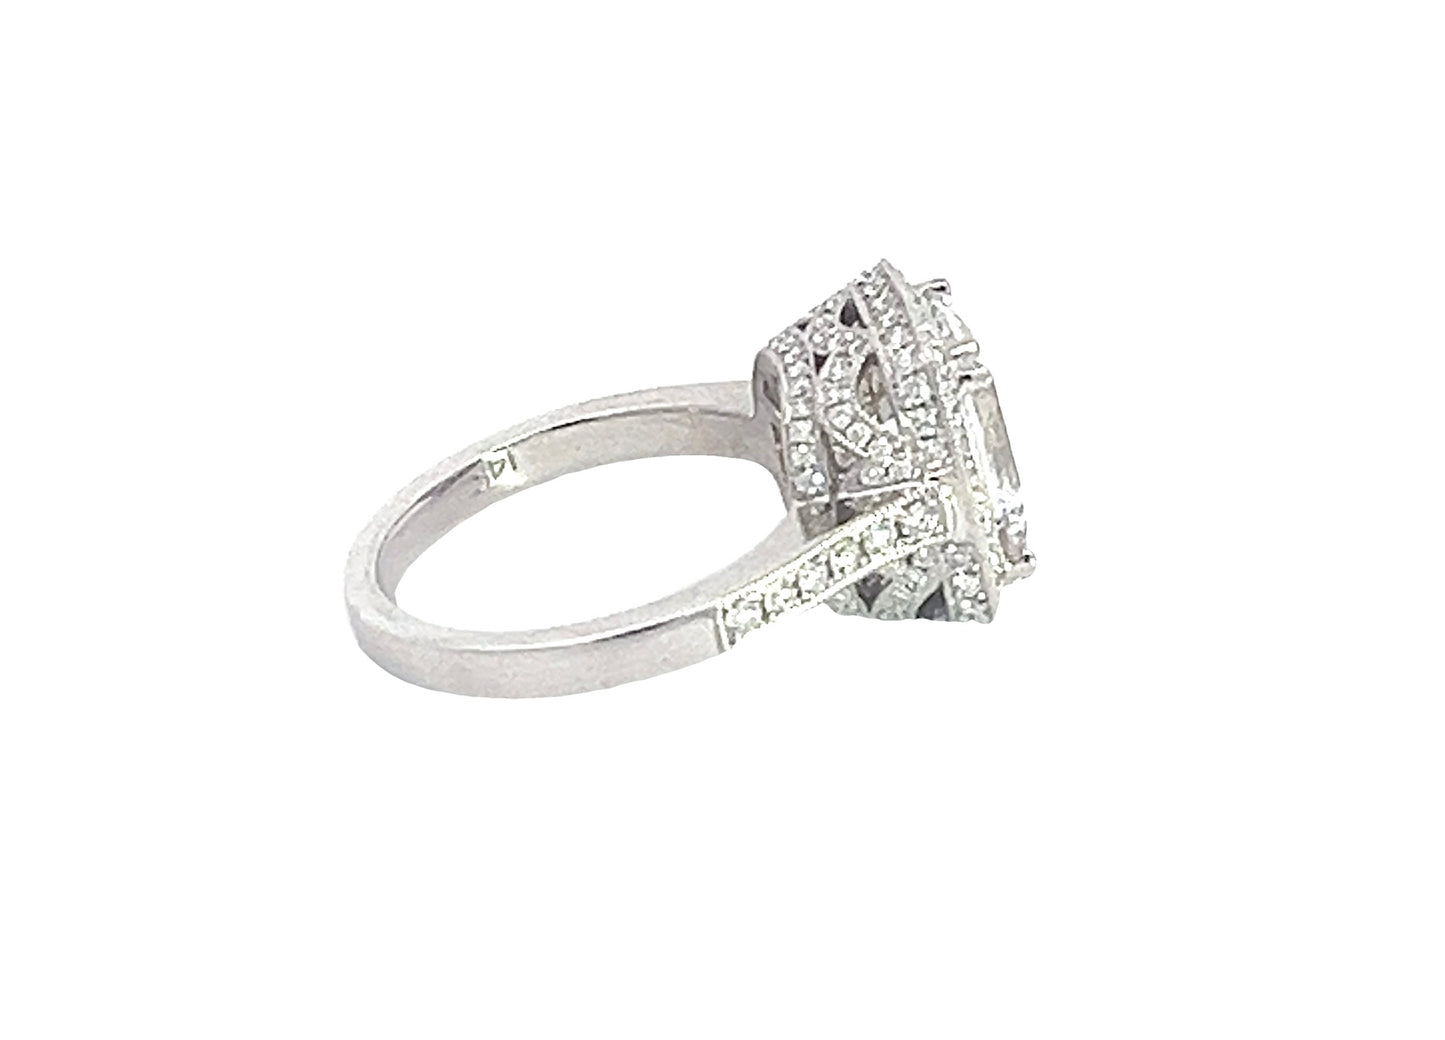 3.75 TCW 14k white gold emerald cut engagement ring